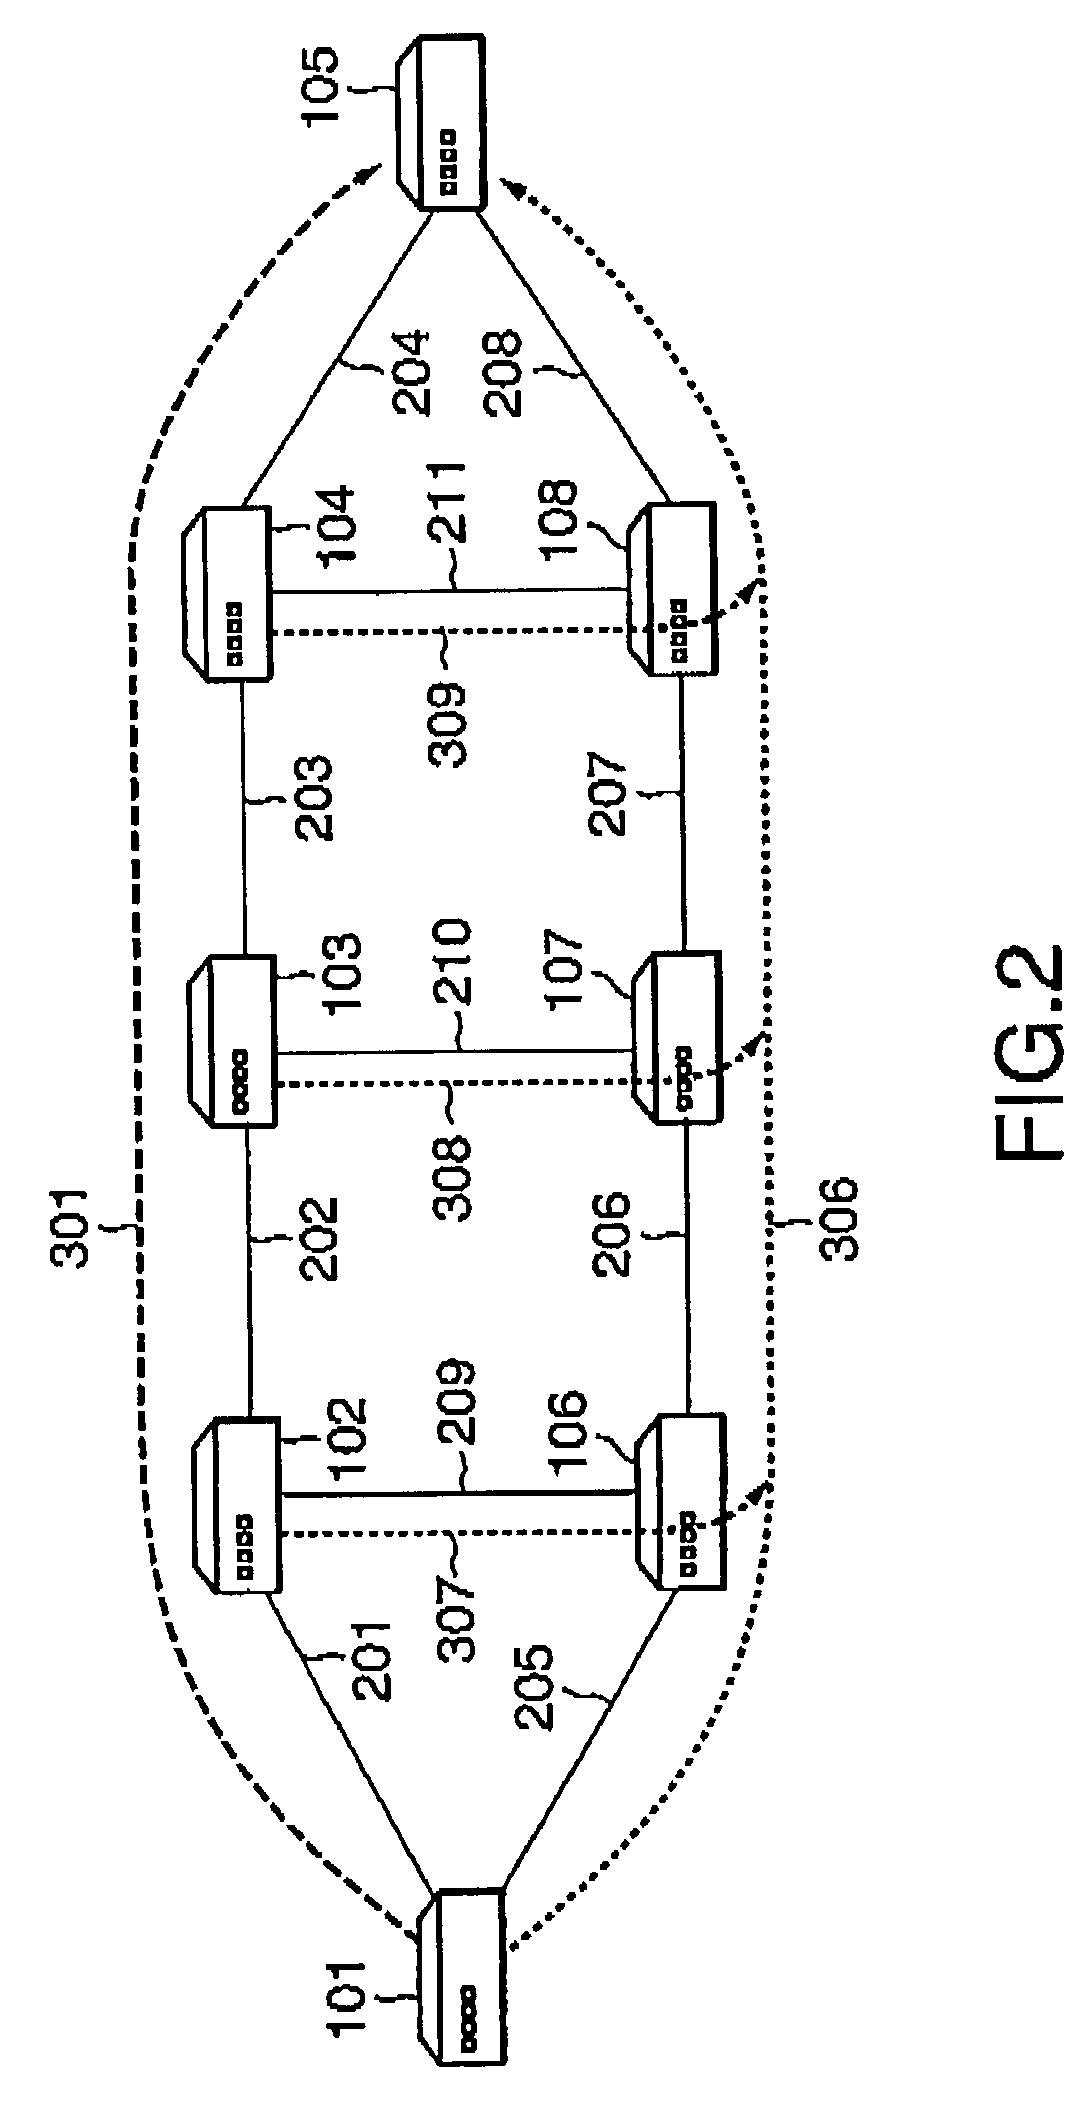 Communication connection bypass method capable of minimizing traffic loss when failure occurs